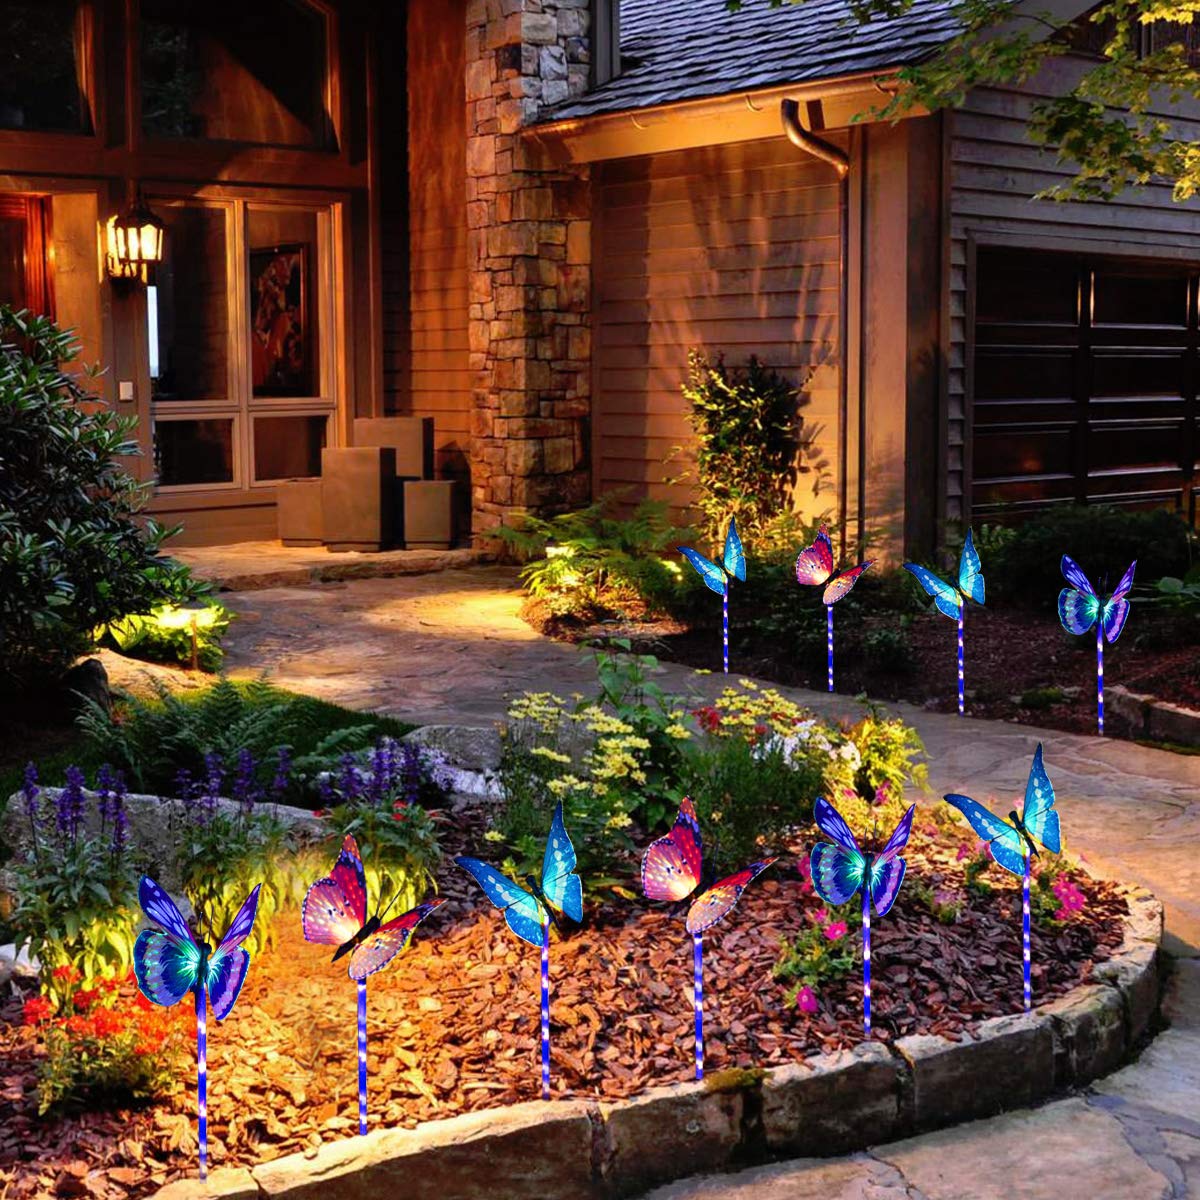 Garden Solar Lights Outdoor, Pack Solar Stake Lights Multi-Color Changing  LED Butterfly, Fiber Optic Butterfly Decorative Lights with a Purple LED Light  Stake (Outdoor Solar Garden Stake Lights)